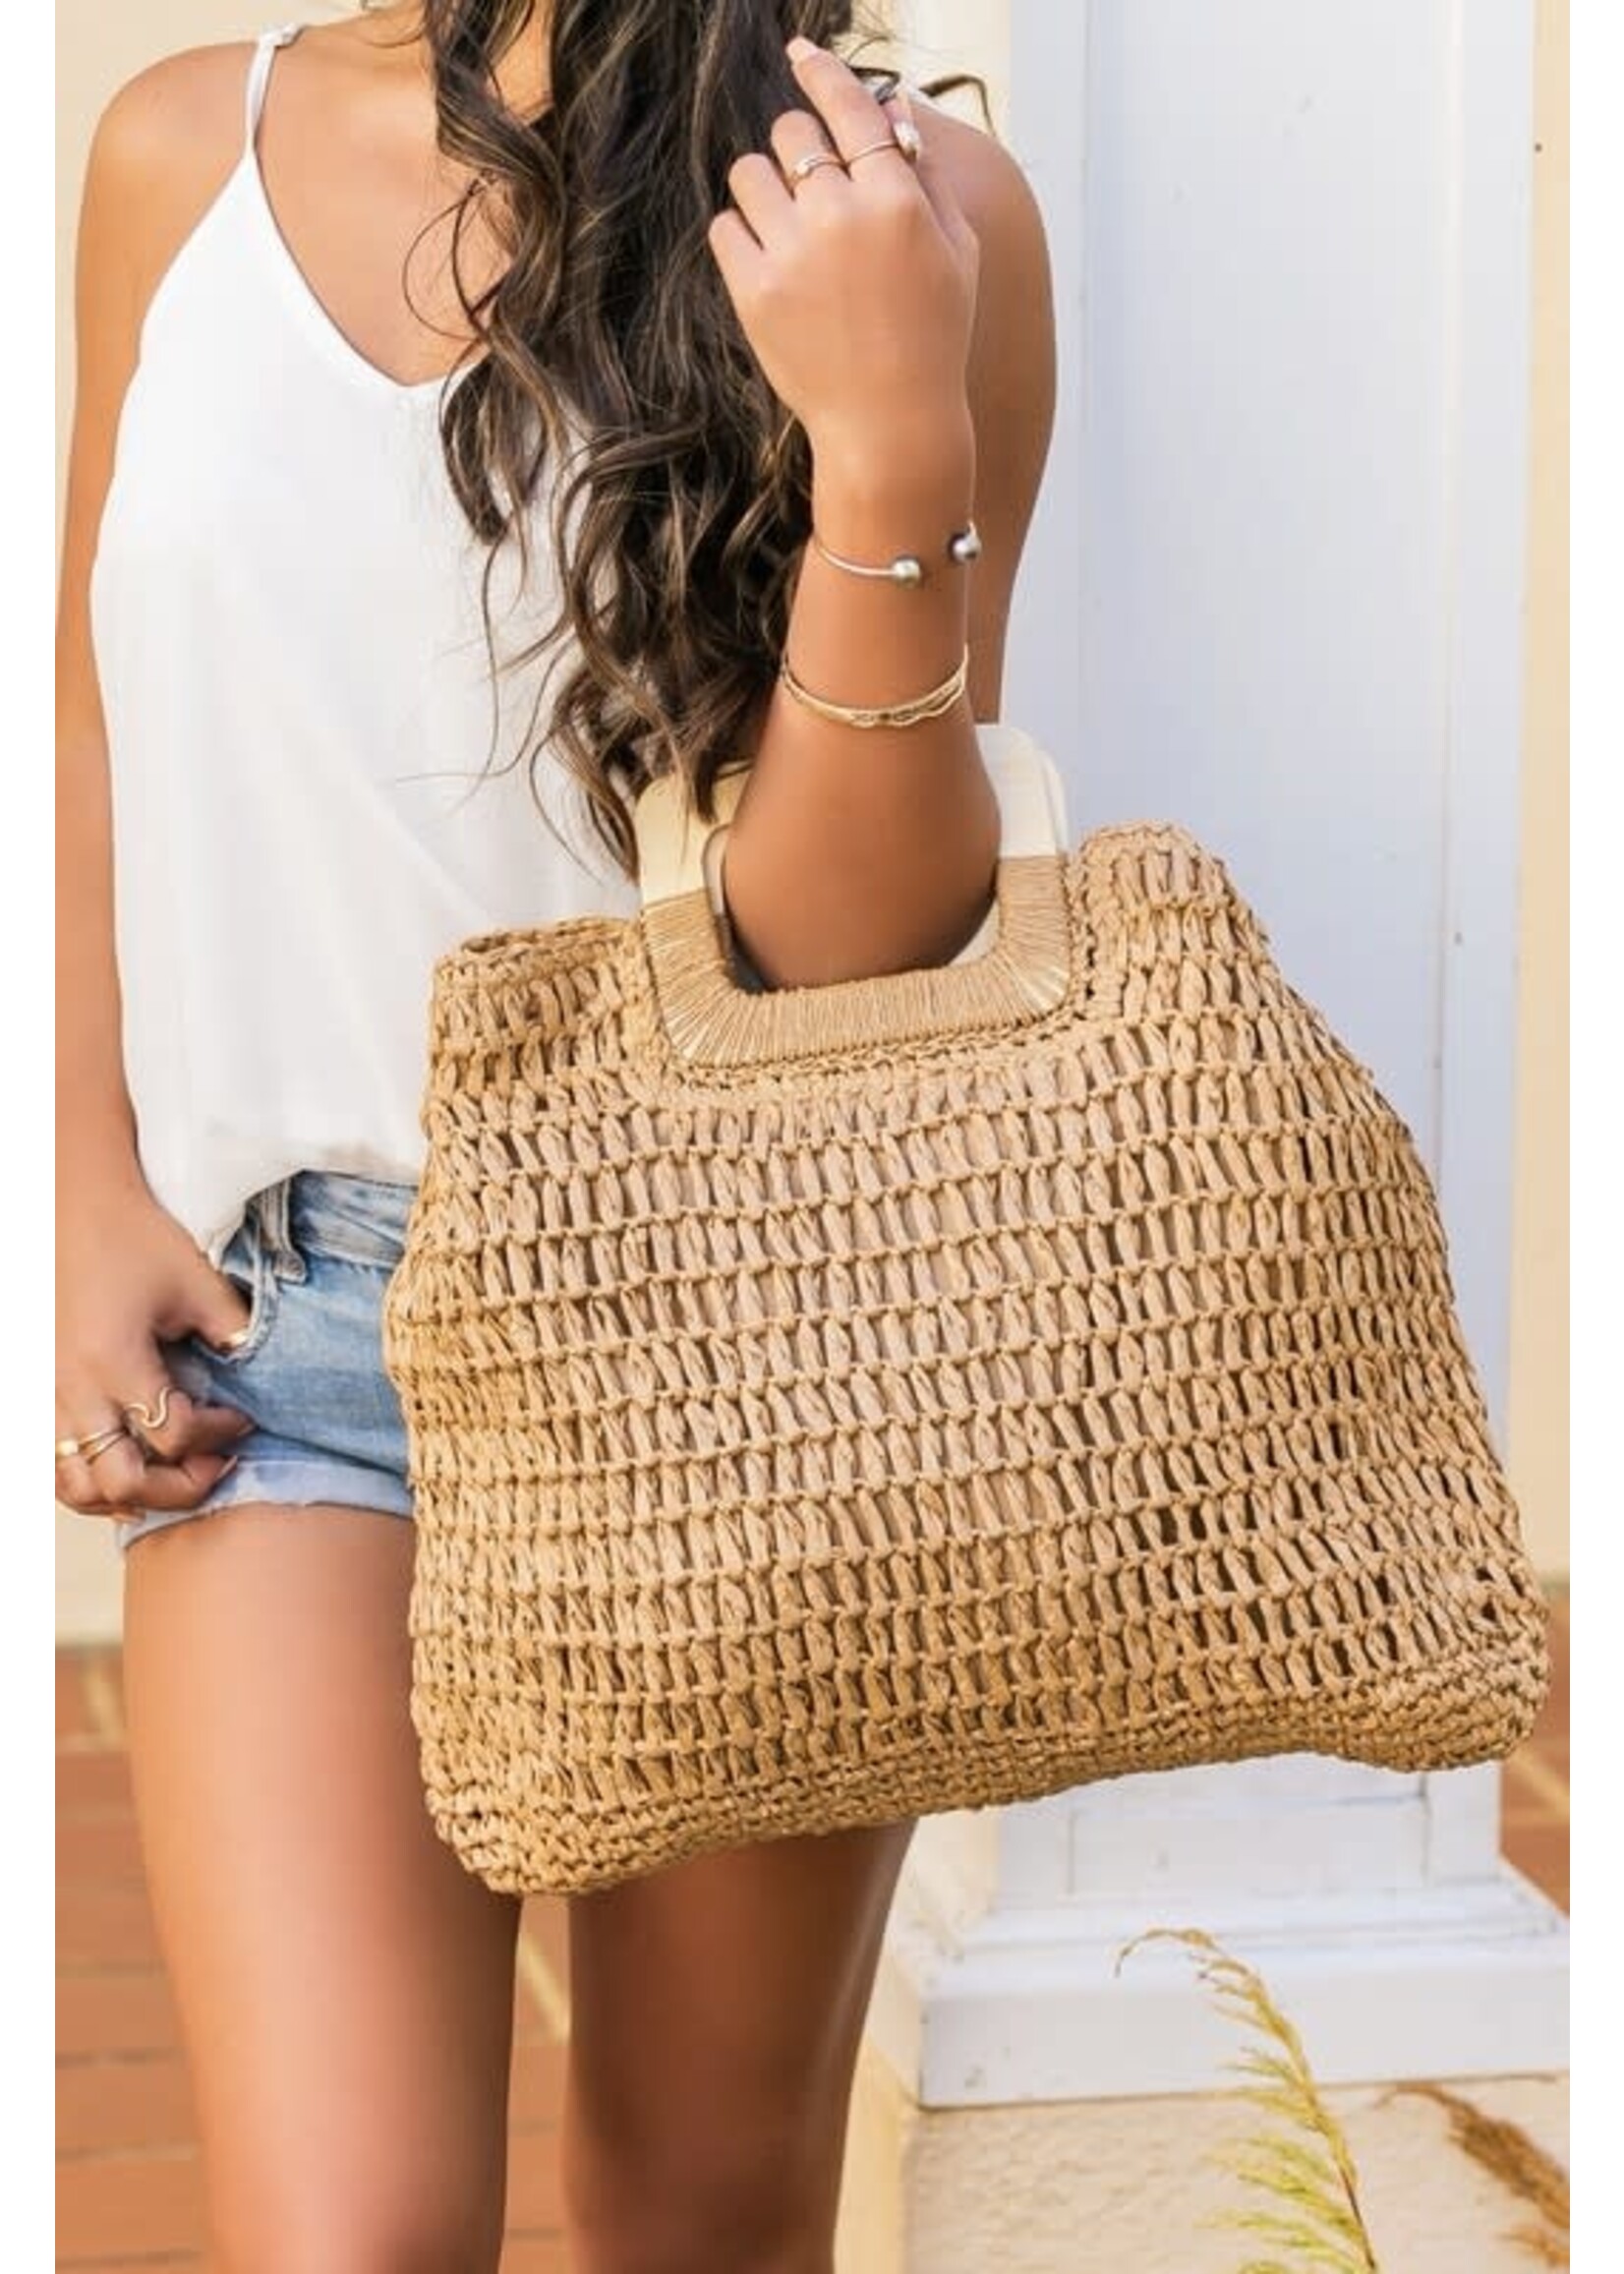 ACBAOST - NATURAL STRAW TOTE W NATURAL WOOD HANDLE AND ZIPPER